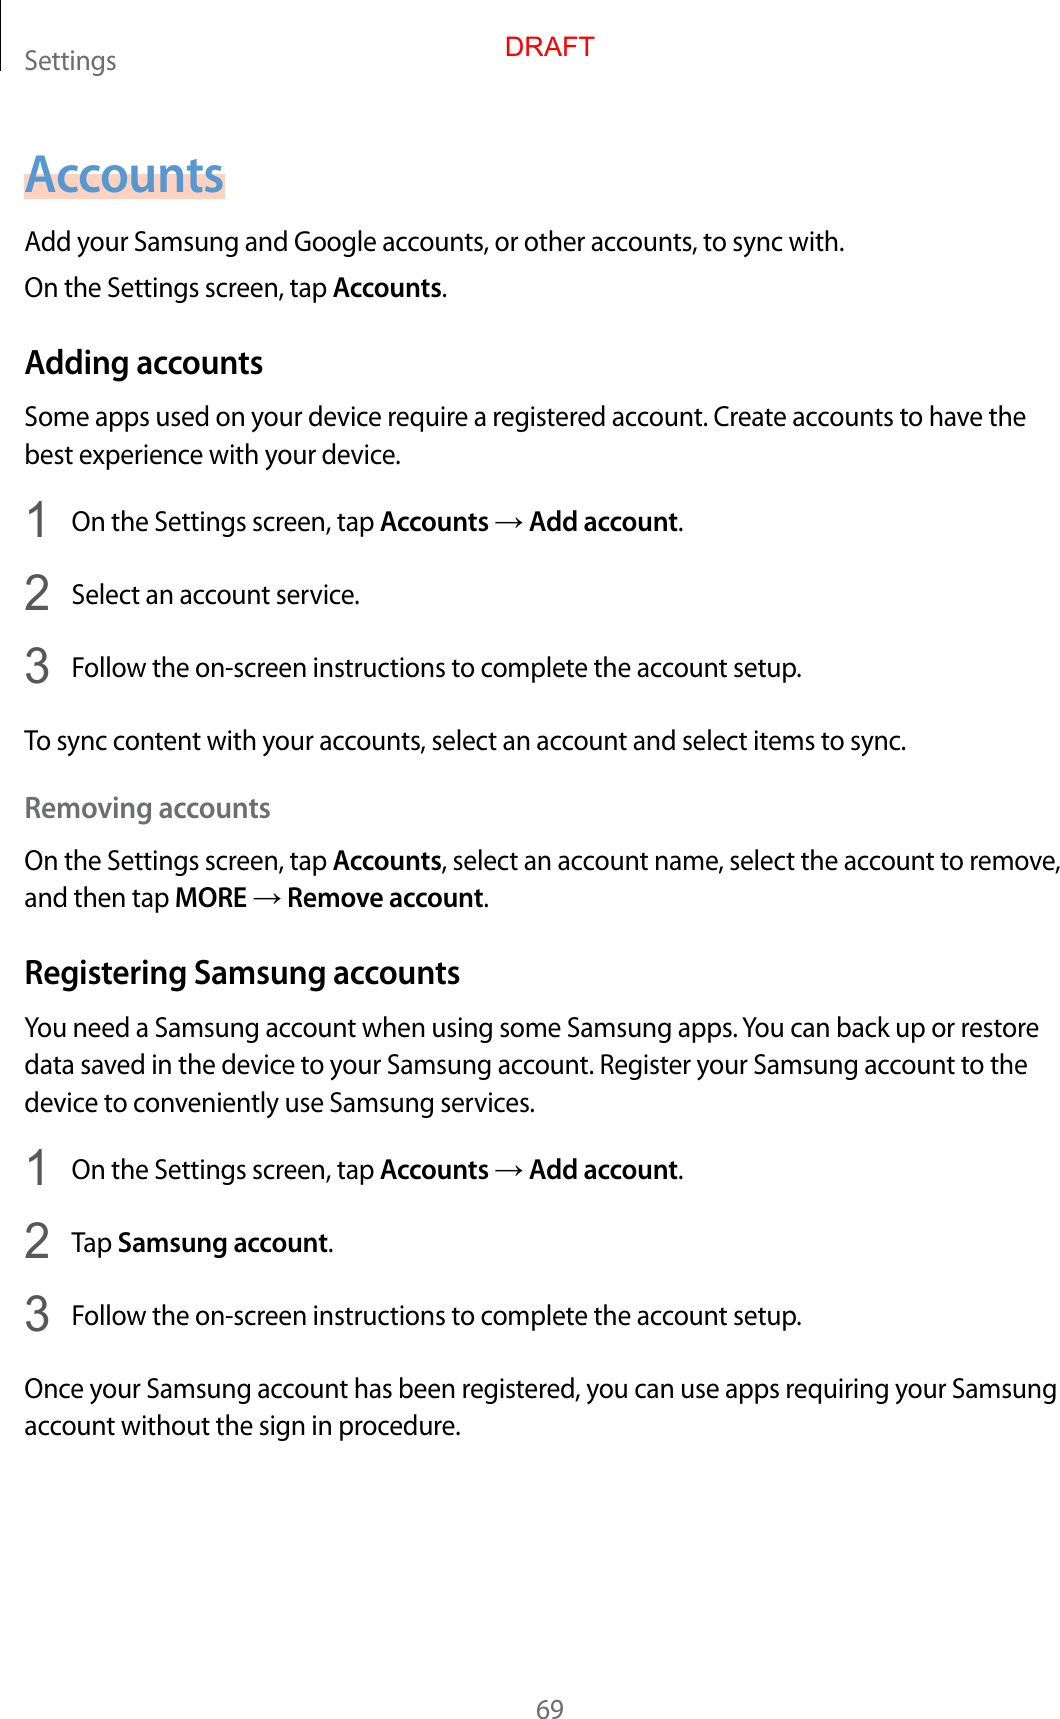 Settings69AccountsAdd y our Samsung and Google accoun ts , or other acc ounts, to sync with.On the Settings screen, tap Accounts.Adding ac c oun tsSome apps used on your device r equir e a r egist er ed ac coun t. Cr ea te ac coun ts to ha v e the best experience with your devic e .1  On the Settings screen, tap Accounts → Add ac c ount.2  Select an accoun t service.3  Follow the on-screen instructions to complete the ac coun t setup.To sync conten t with y our acc ounts , select an accoun t and select items to sync .Removing acc oun tsOn the Settings screen, tap Accounts, select an account name, select the accoun t to r emo v e , and then tap MORE → Remov e acc oun t.Registering Samsung acc ountsYou need a Samsung account when using some Samsung apps. You can back up or restore data sav ed in the devic e to y our Samsung acc ount . Regist er y our Samsung accoun t to the device to c on v eniently use Samsung services.1  On the Settings screen, tap Accounts → Add ac c ount.2  Tap Samsung account.3  Follow the on-screen instructions to complete the ac coun t setup.Once your Samsung ac coun t has been r egist er ed , y ou can use apps r equiring your Samsung account without the sig n in pr oc edur e .DRAFT